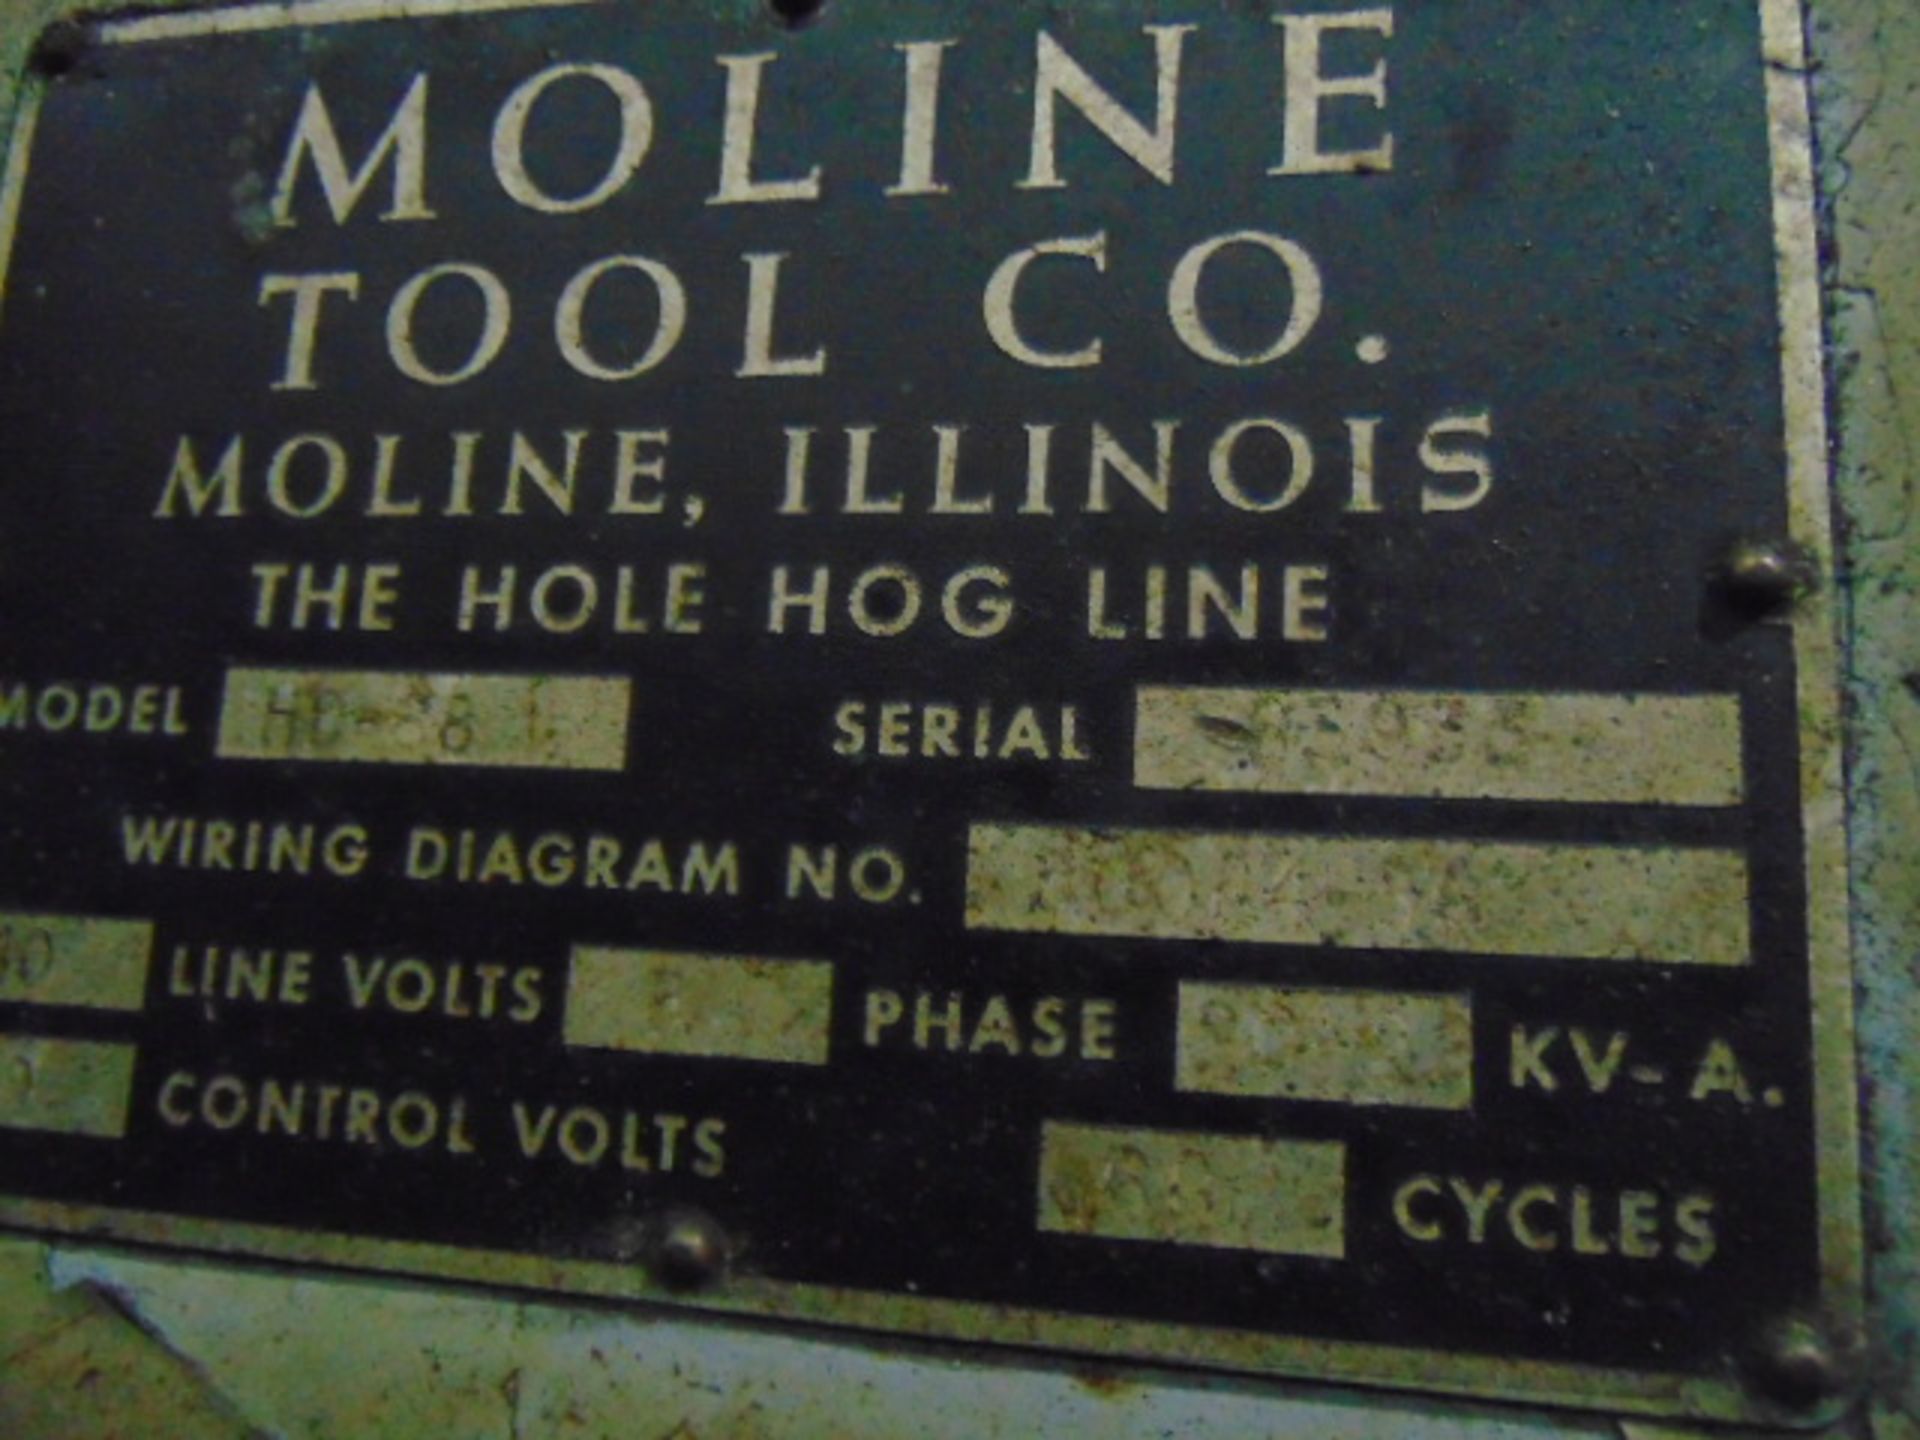 TWIN SPINDLE DRILL, MOLINE MDL. HD68 "THE HOLE HOG LINE", 72" rotary tbl., (2) spline drive - Image 16 of 18